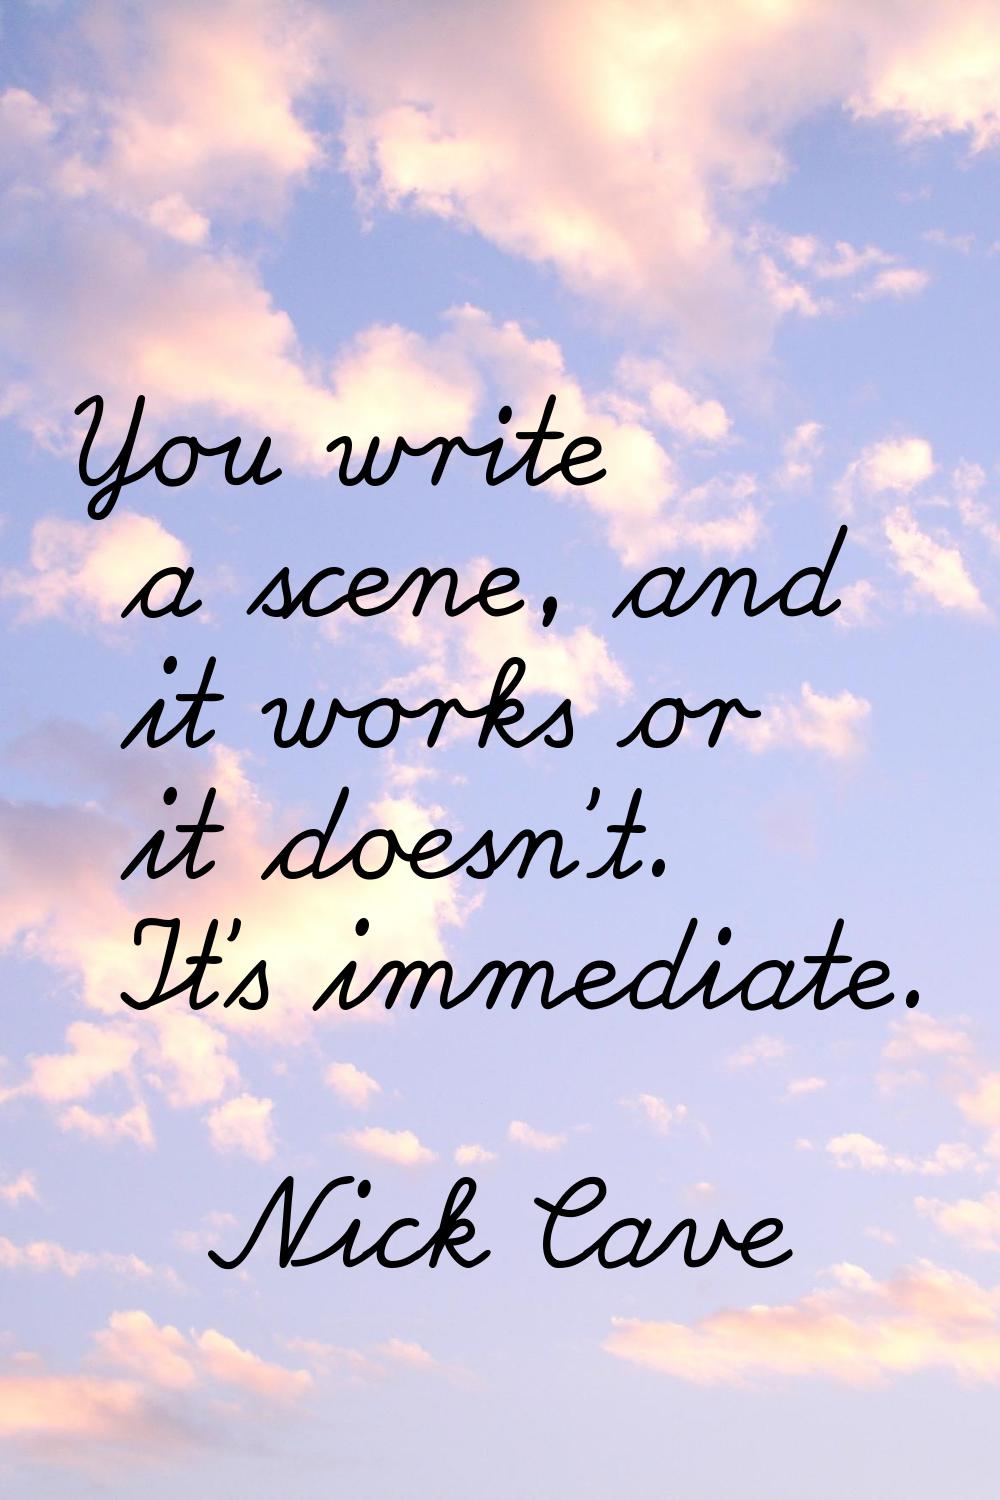 You write a scene, and it works or it doesn't. It's immediate.